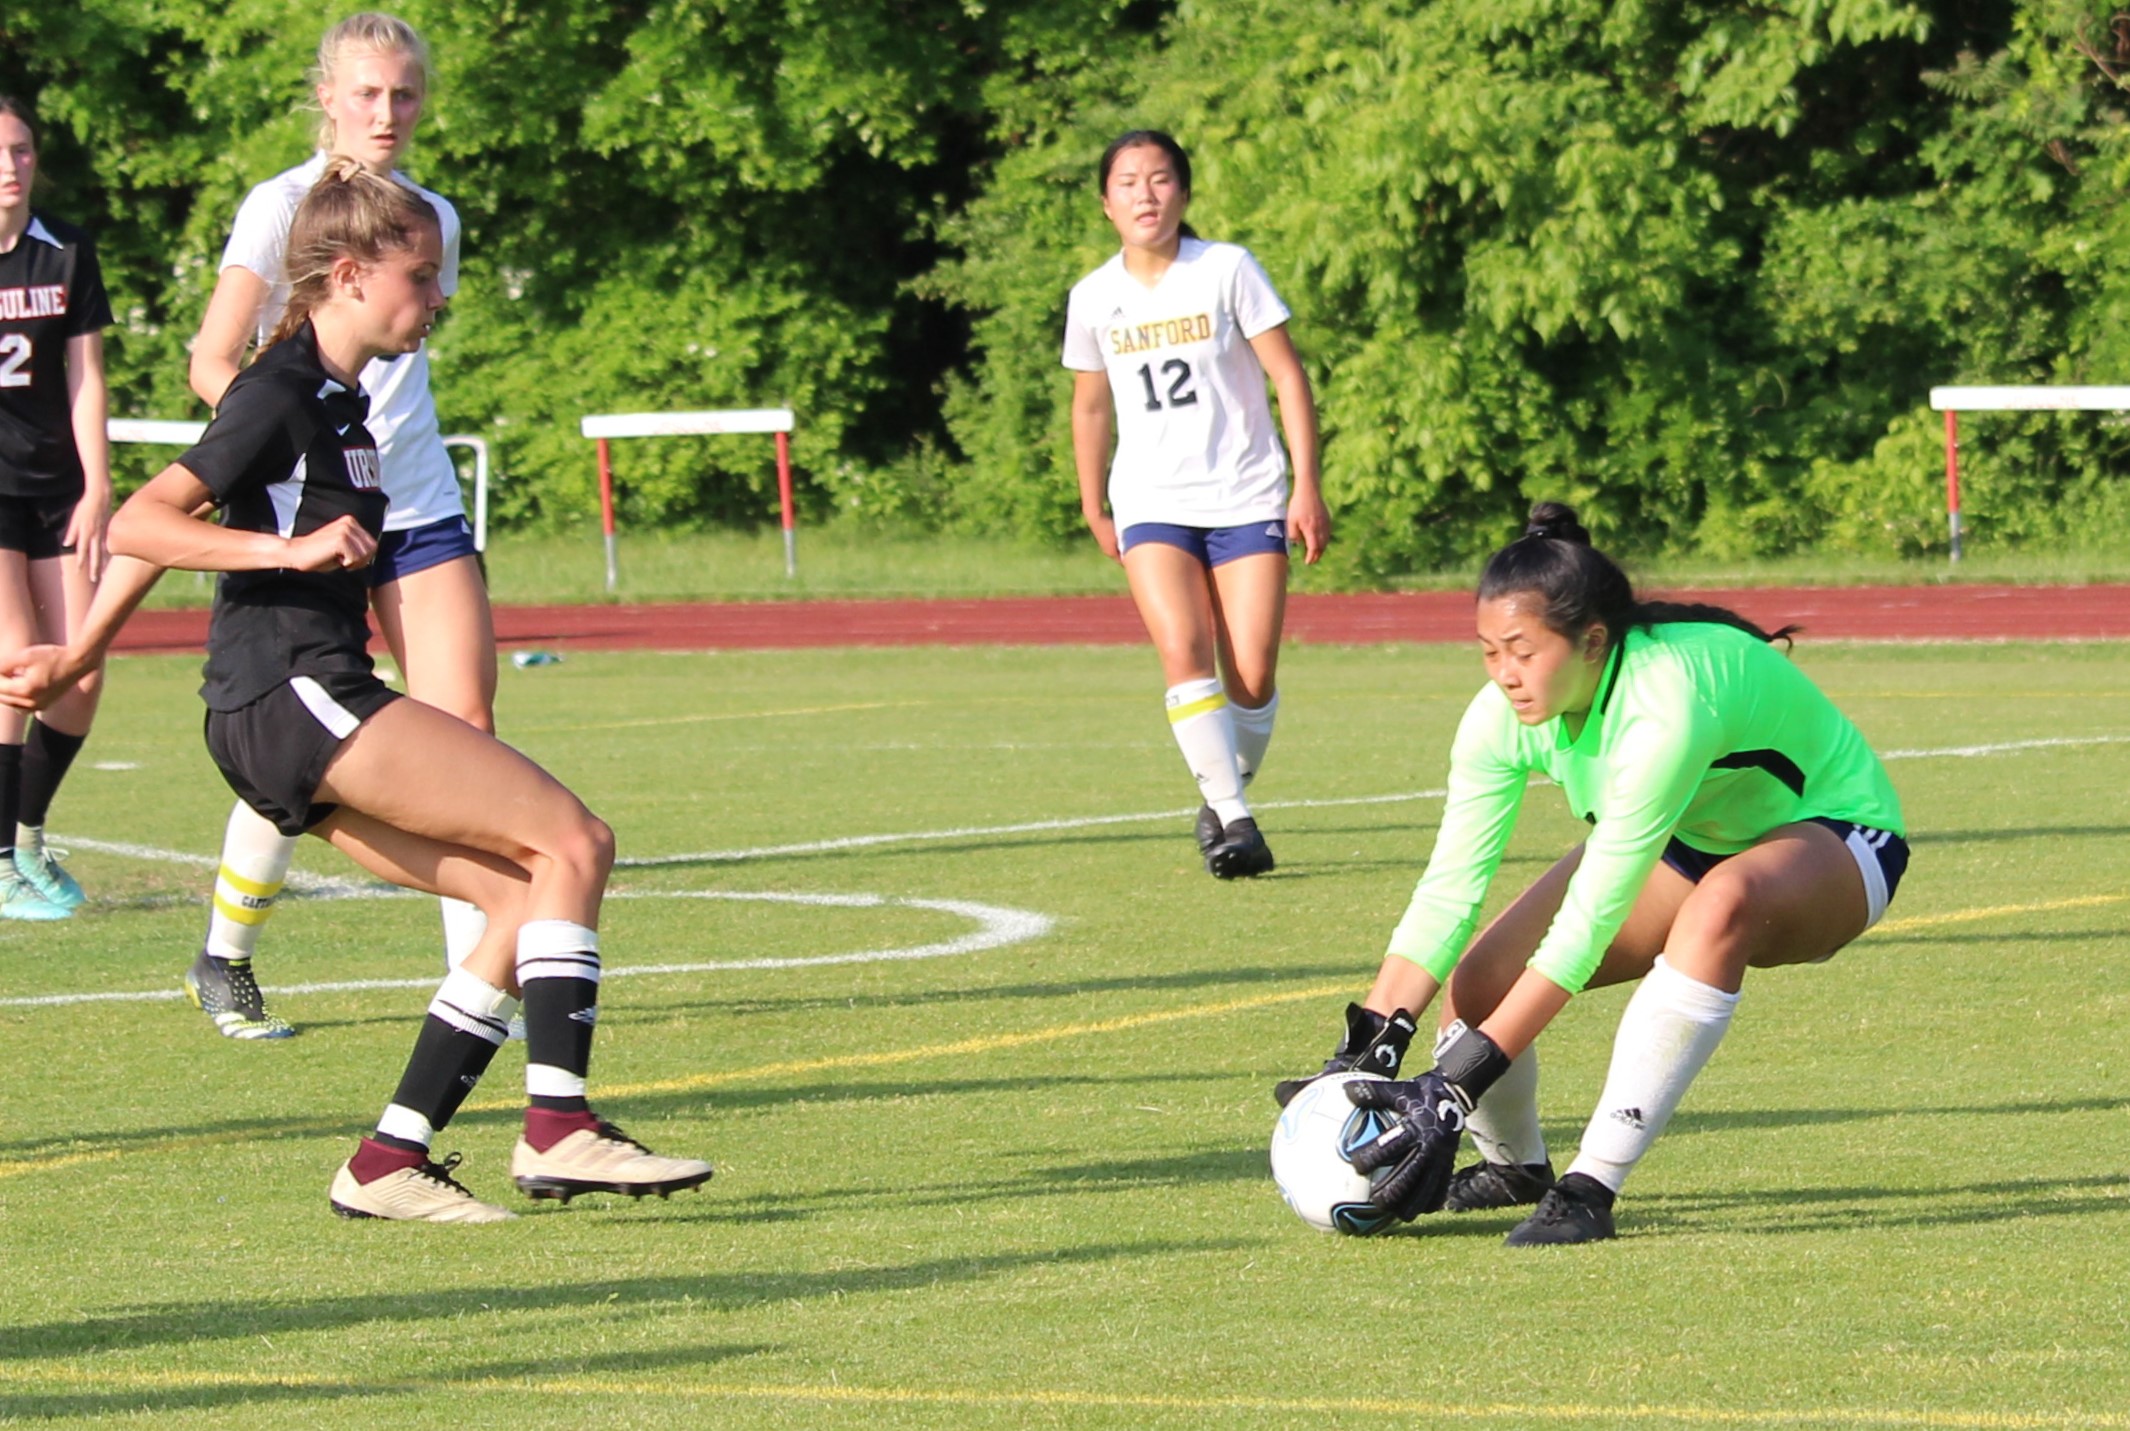 Ursuline ties late, wins in overtime on Emma Raftovich goal against